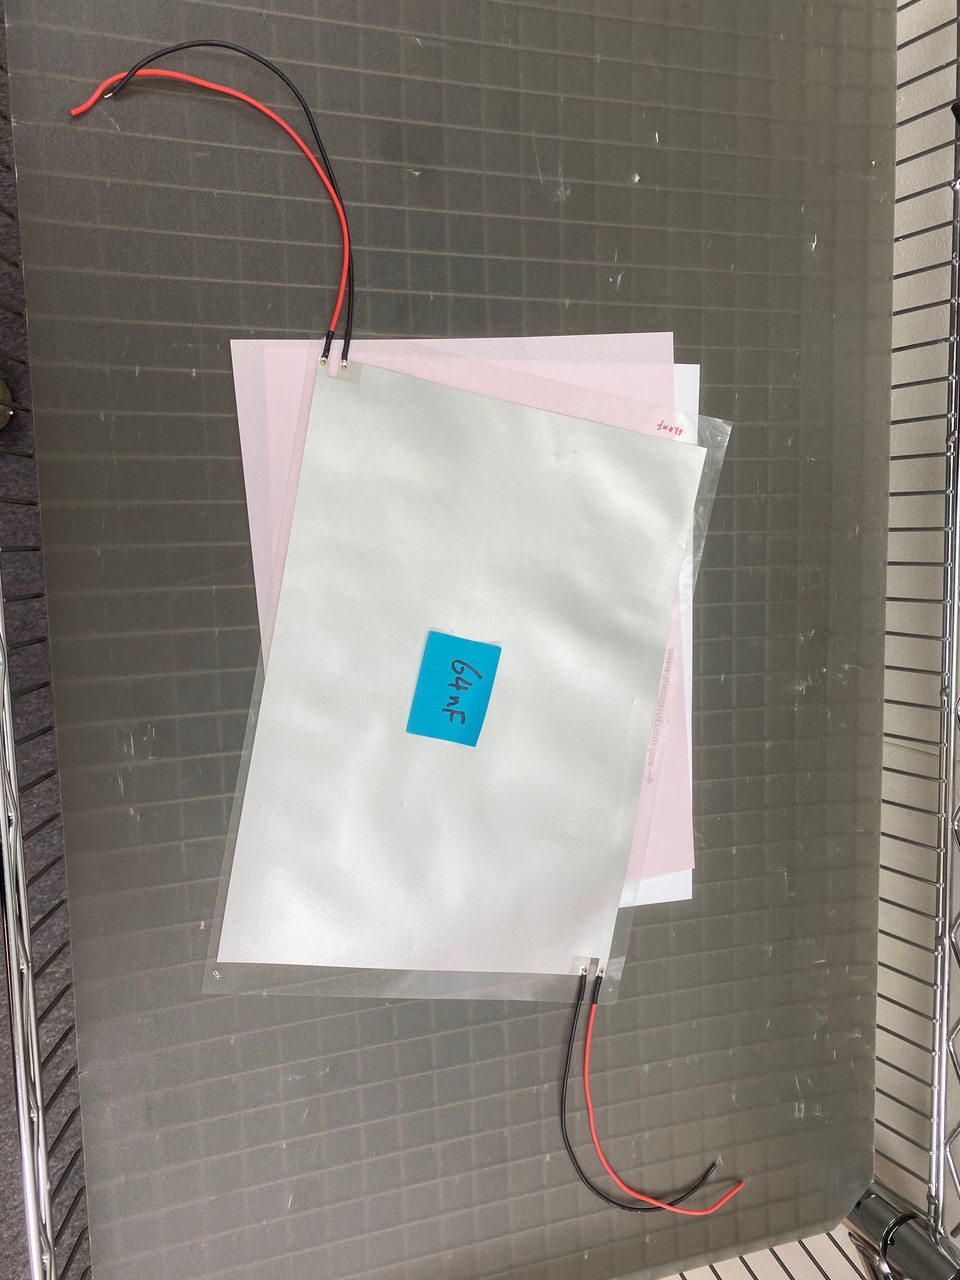 100um thick PVDF piezoelectric film, Screen-Printed Silver Electrode, with connection wires